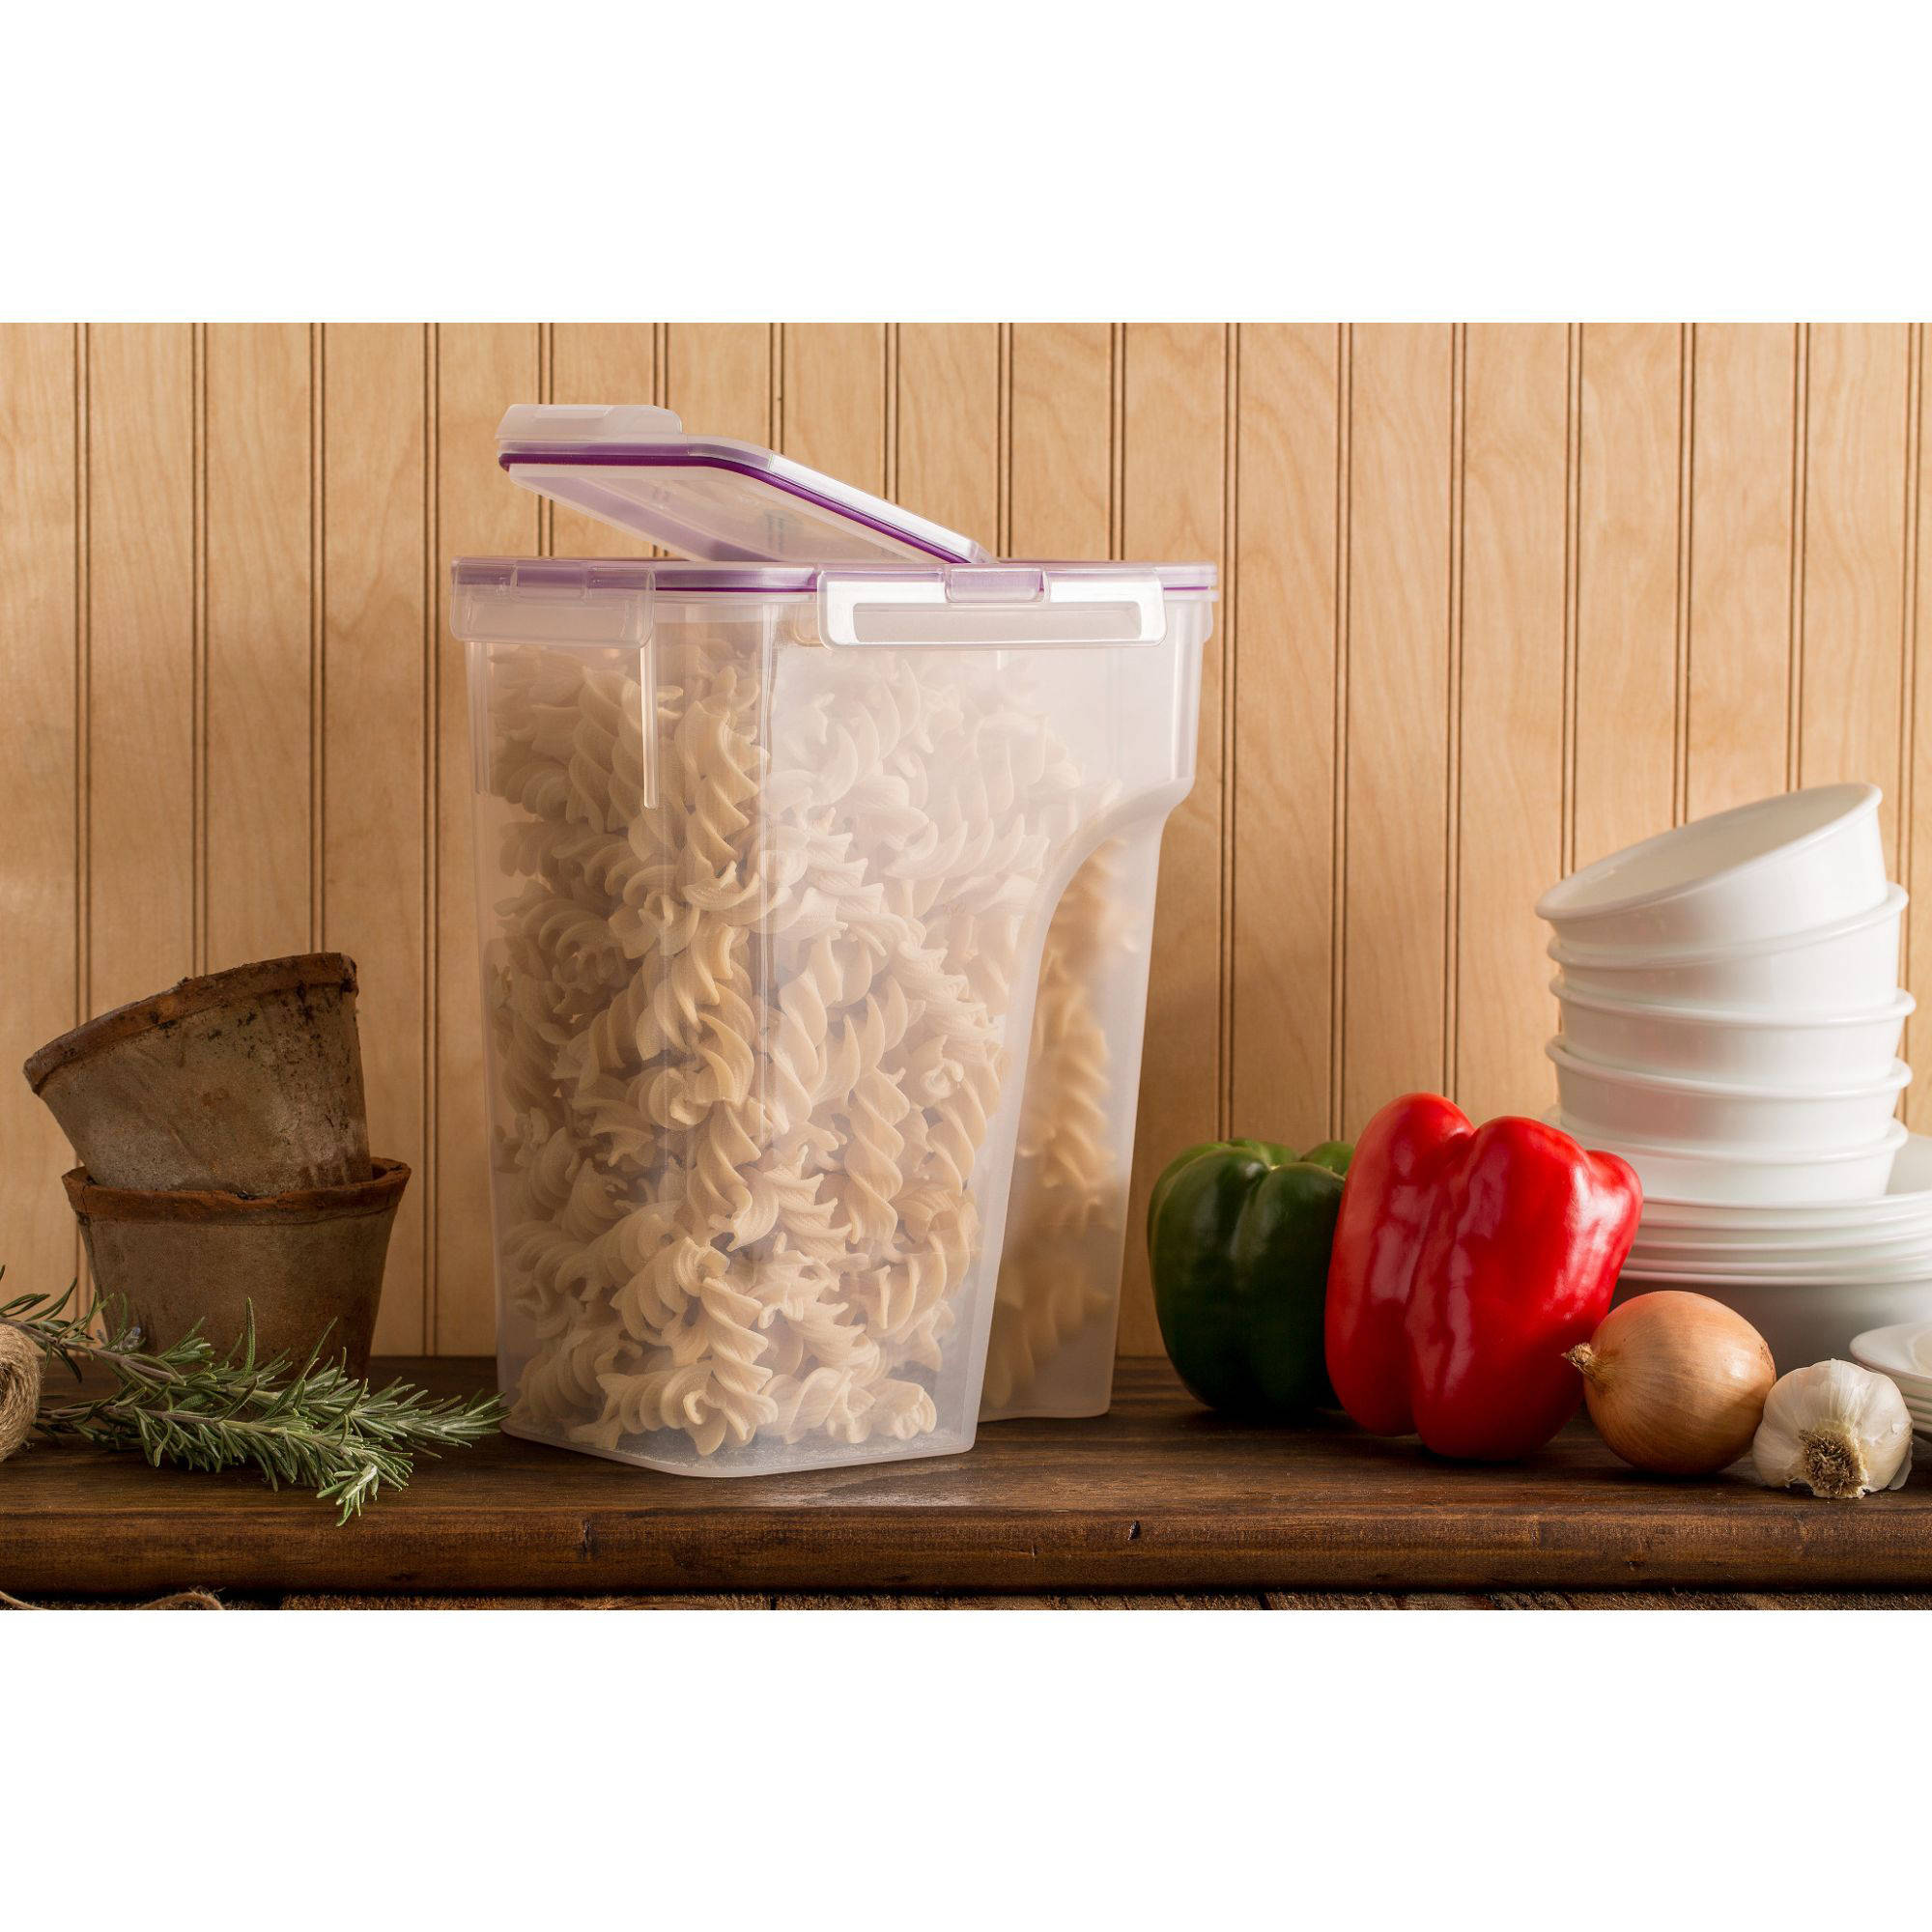 Snapware Airtight Food Storage 22.8-Cup Container with Fliptop Lid, Set of 4 - image 2 of 4